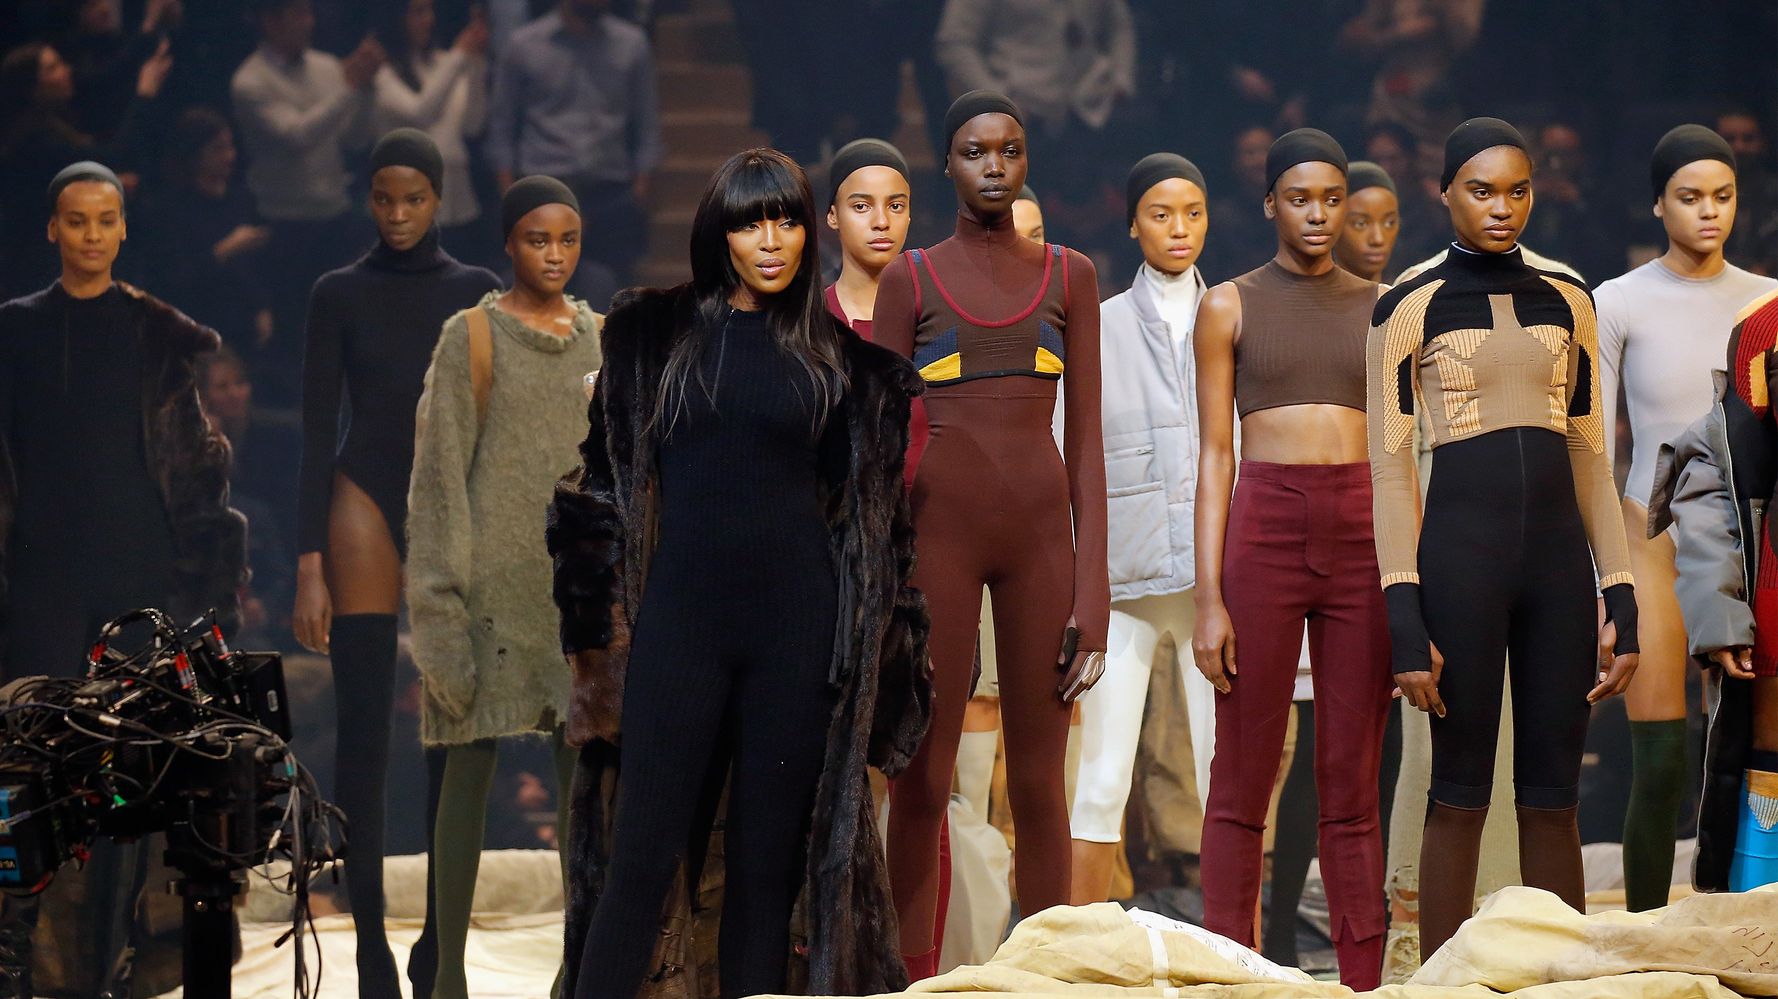 Kanye West Had The Most Diverse Show At Fashion Week, But We've Got A Long  Way To Go